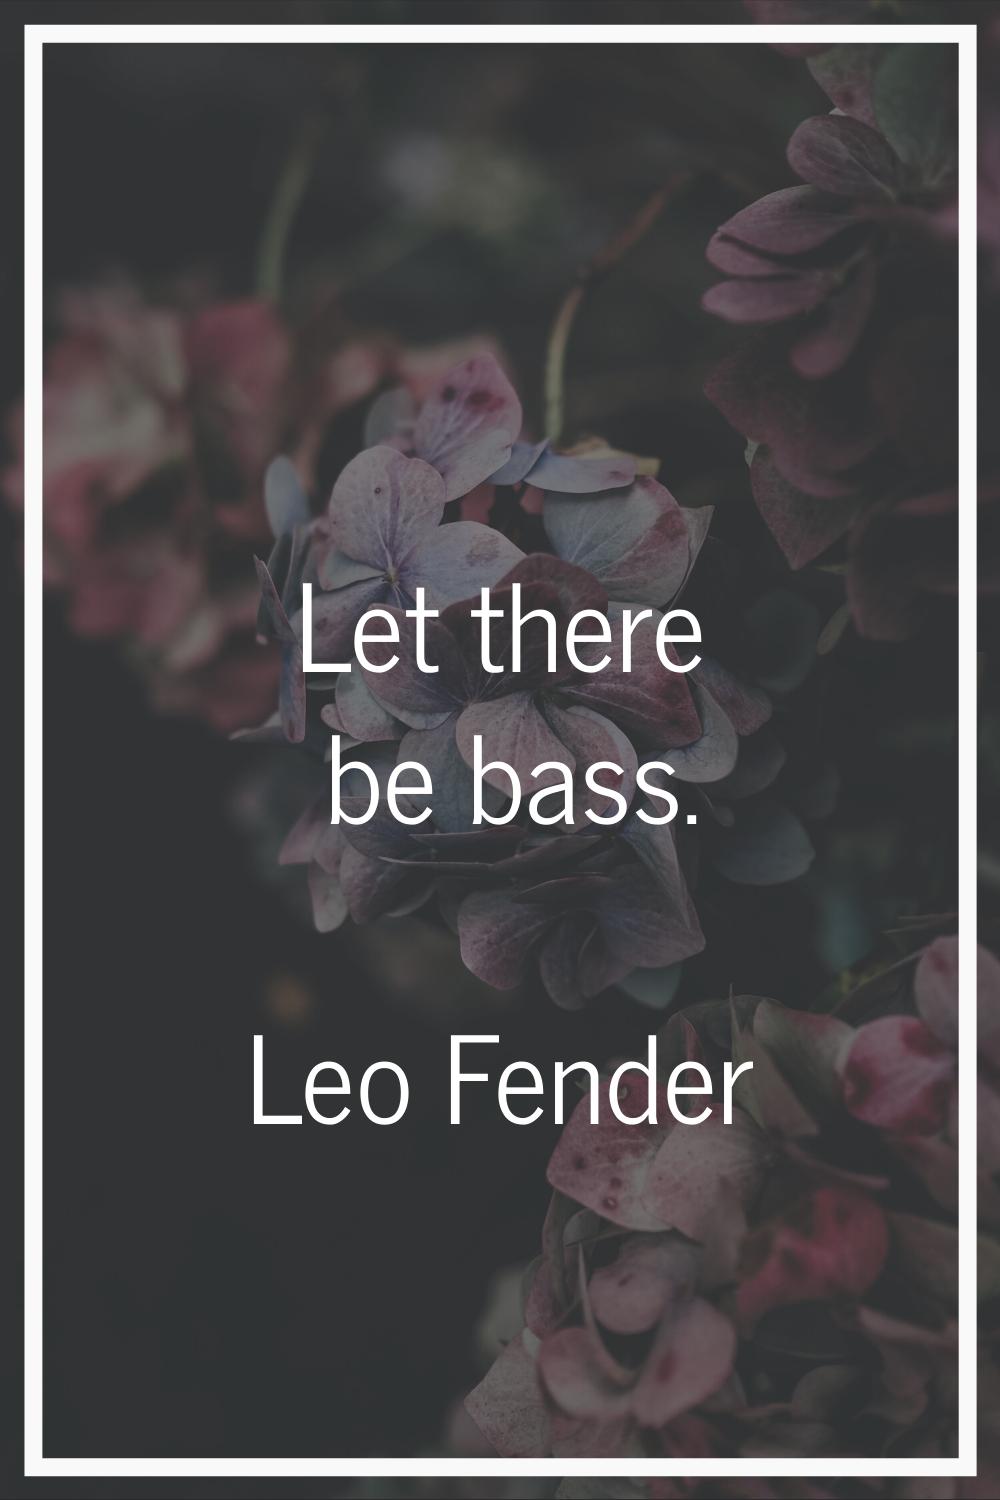 Let there be bass.